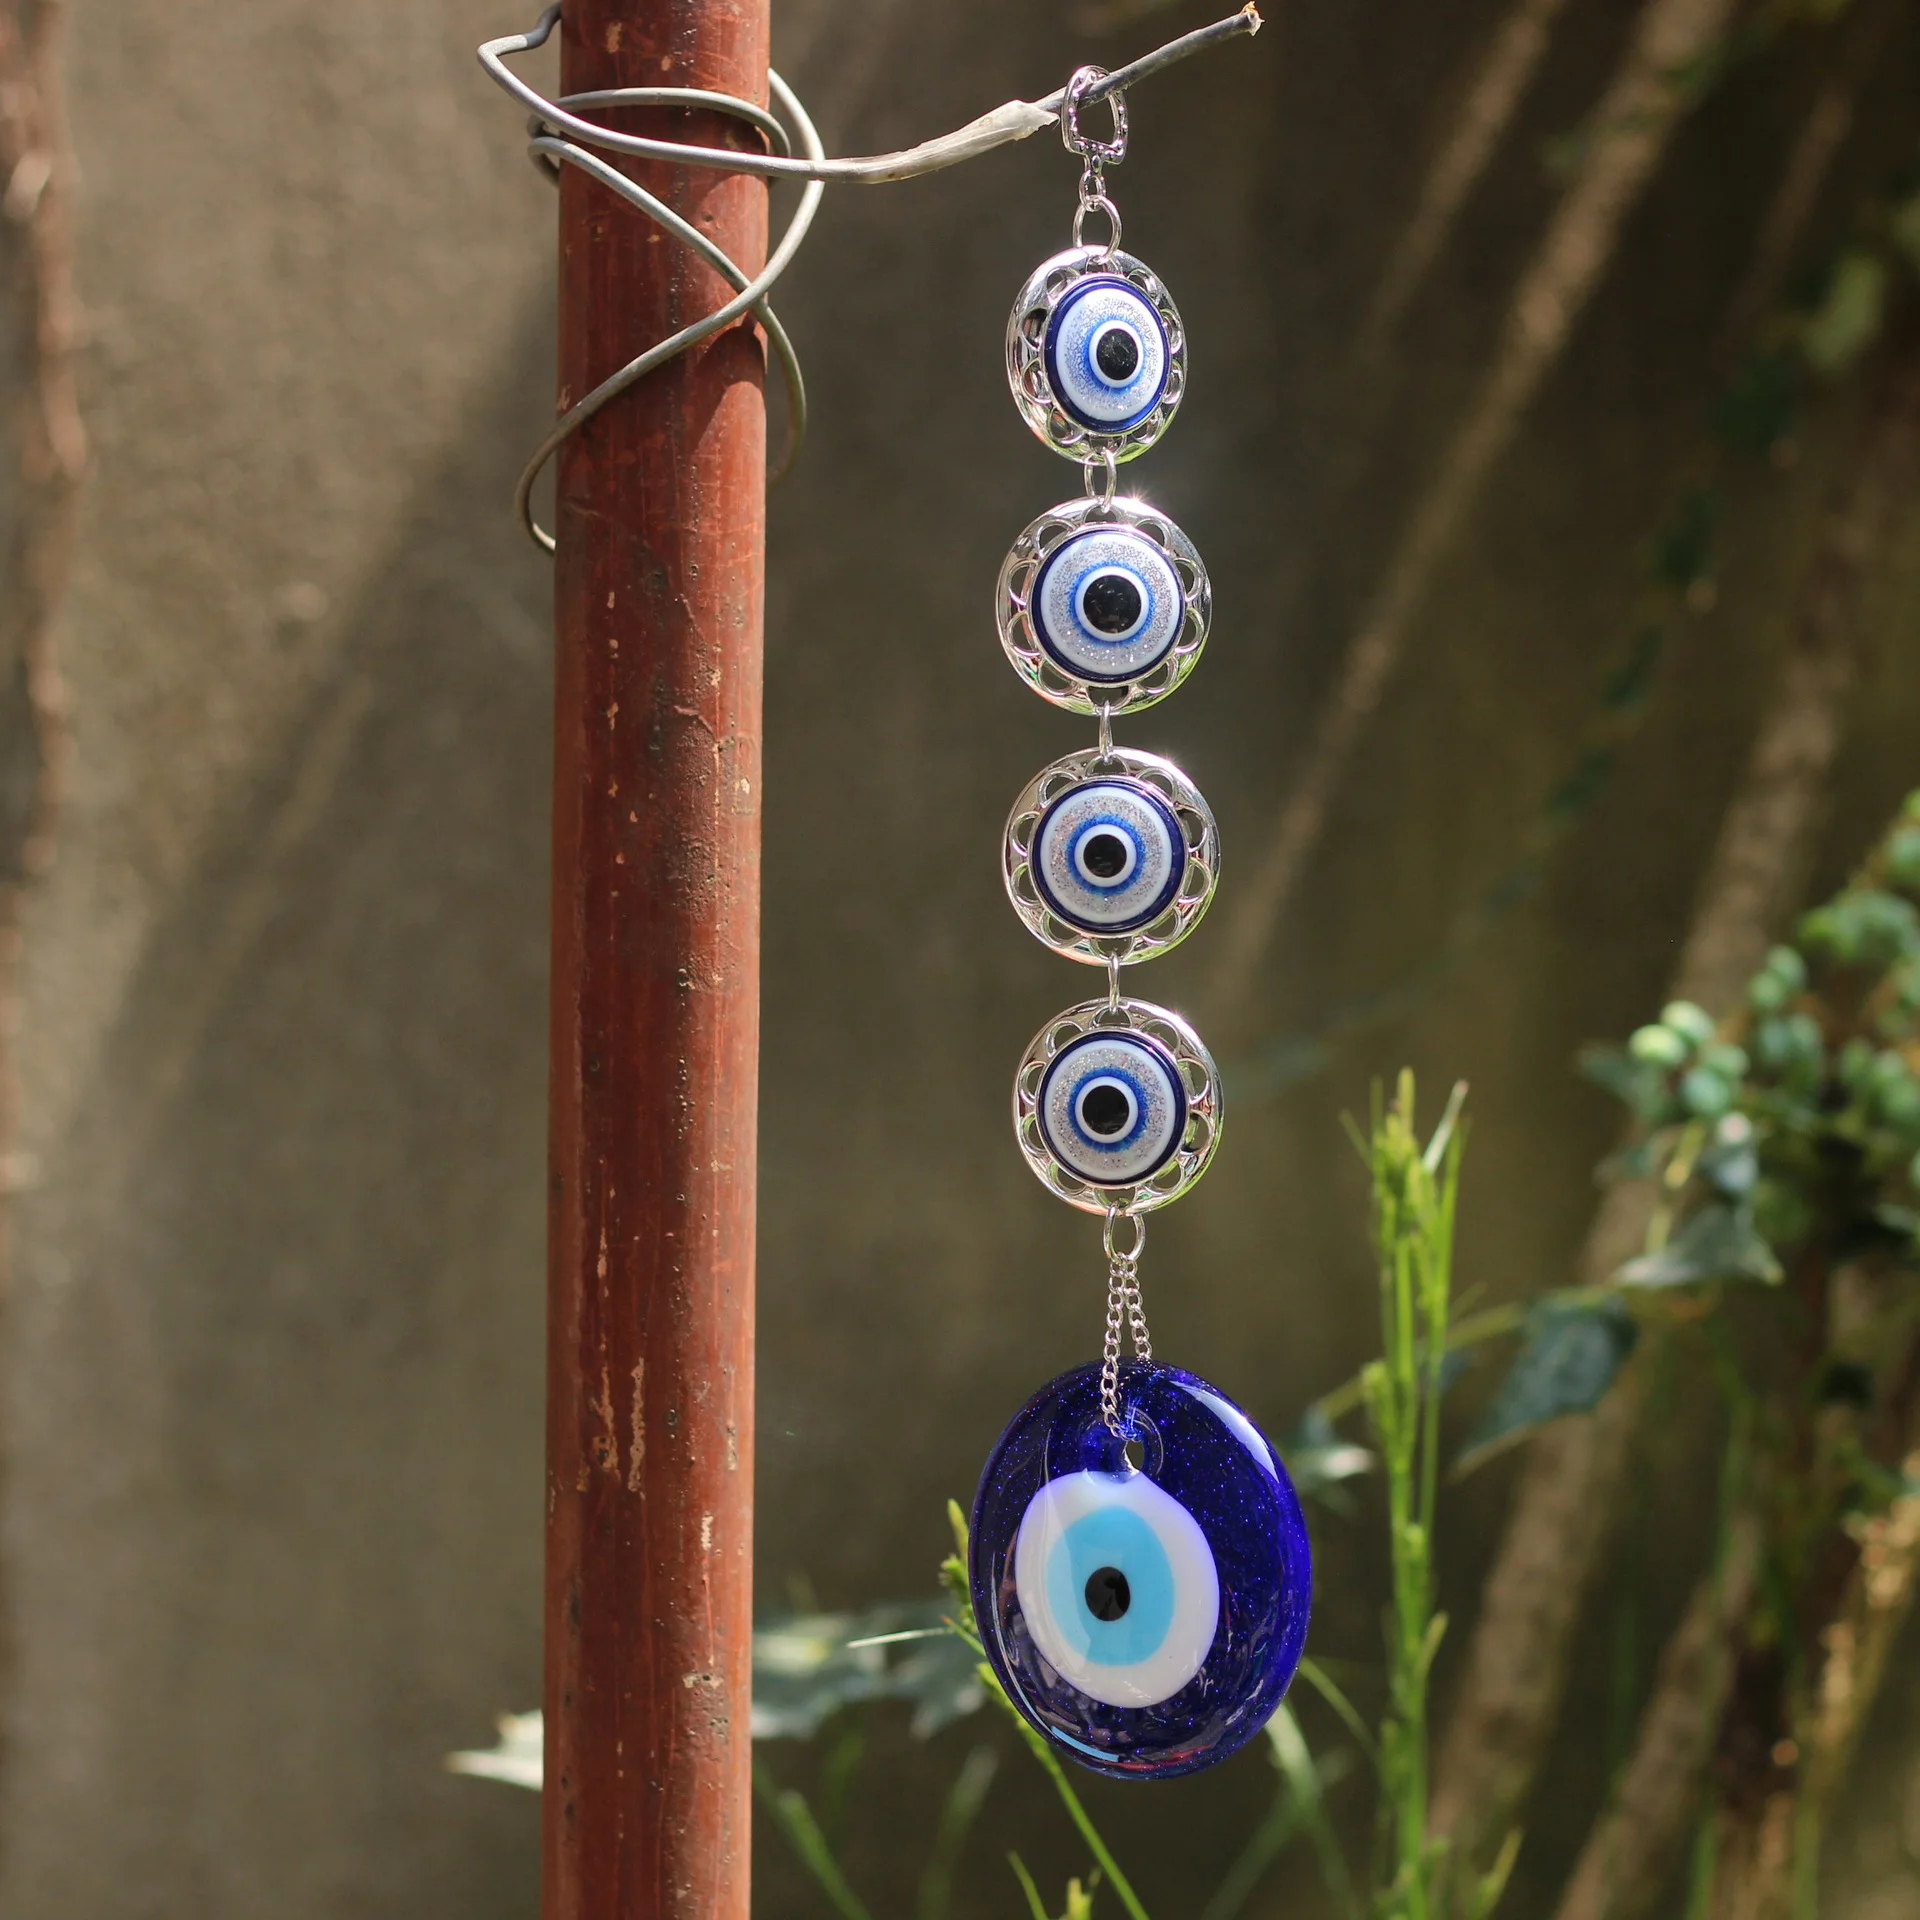 Turkish Blue Evil Eye Pendant Bead Wall Hanging Handmade Decoration for Living Room Car Gift  Home Decor Protection Blessing